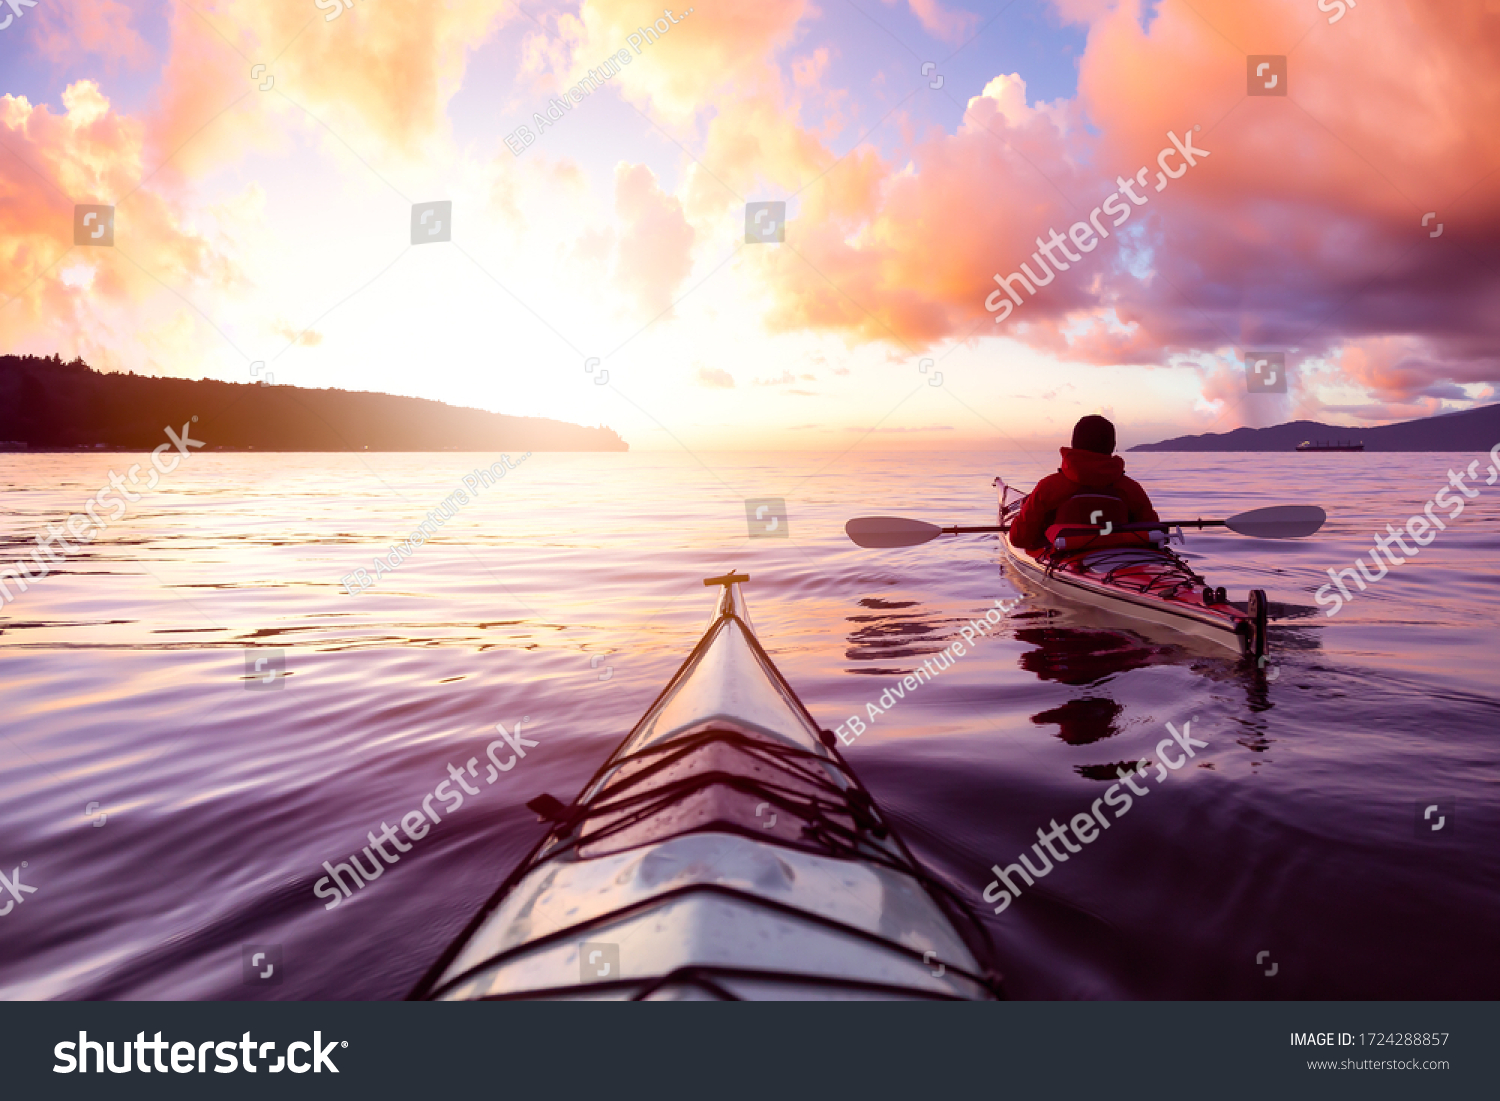 Adventurous Man Sea Kayaking in the Ocean during a colorful Sunset. Cloudy Sky Composite. Taken in Jericho, Vancouver, British Columbia, Canada. #1724288857